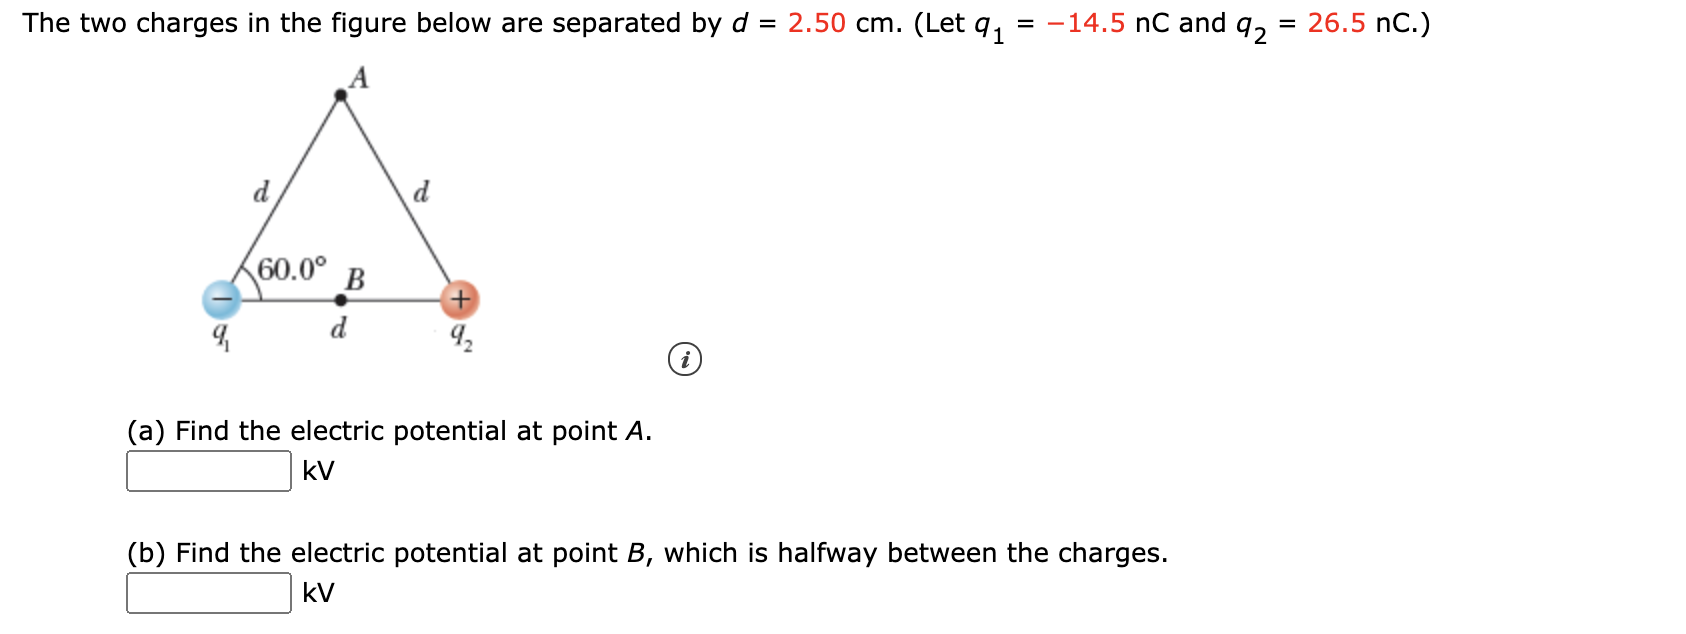 The two charges in the figure below are separated by d = 2.50 cm. (Let q,
= -14.5 nC and q, = 26.5 nC.)
%3D
d
d
60.0°
B
d
(a) Find the electric potential at point A.
kV
(b) Find the electric potential at point B, which is halfway between the charges.
kV
